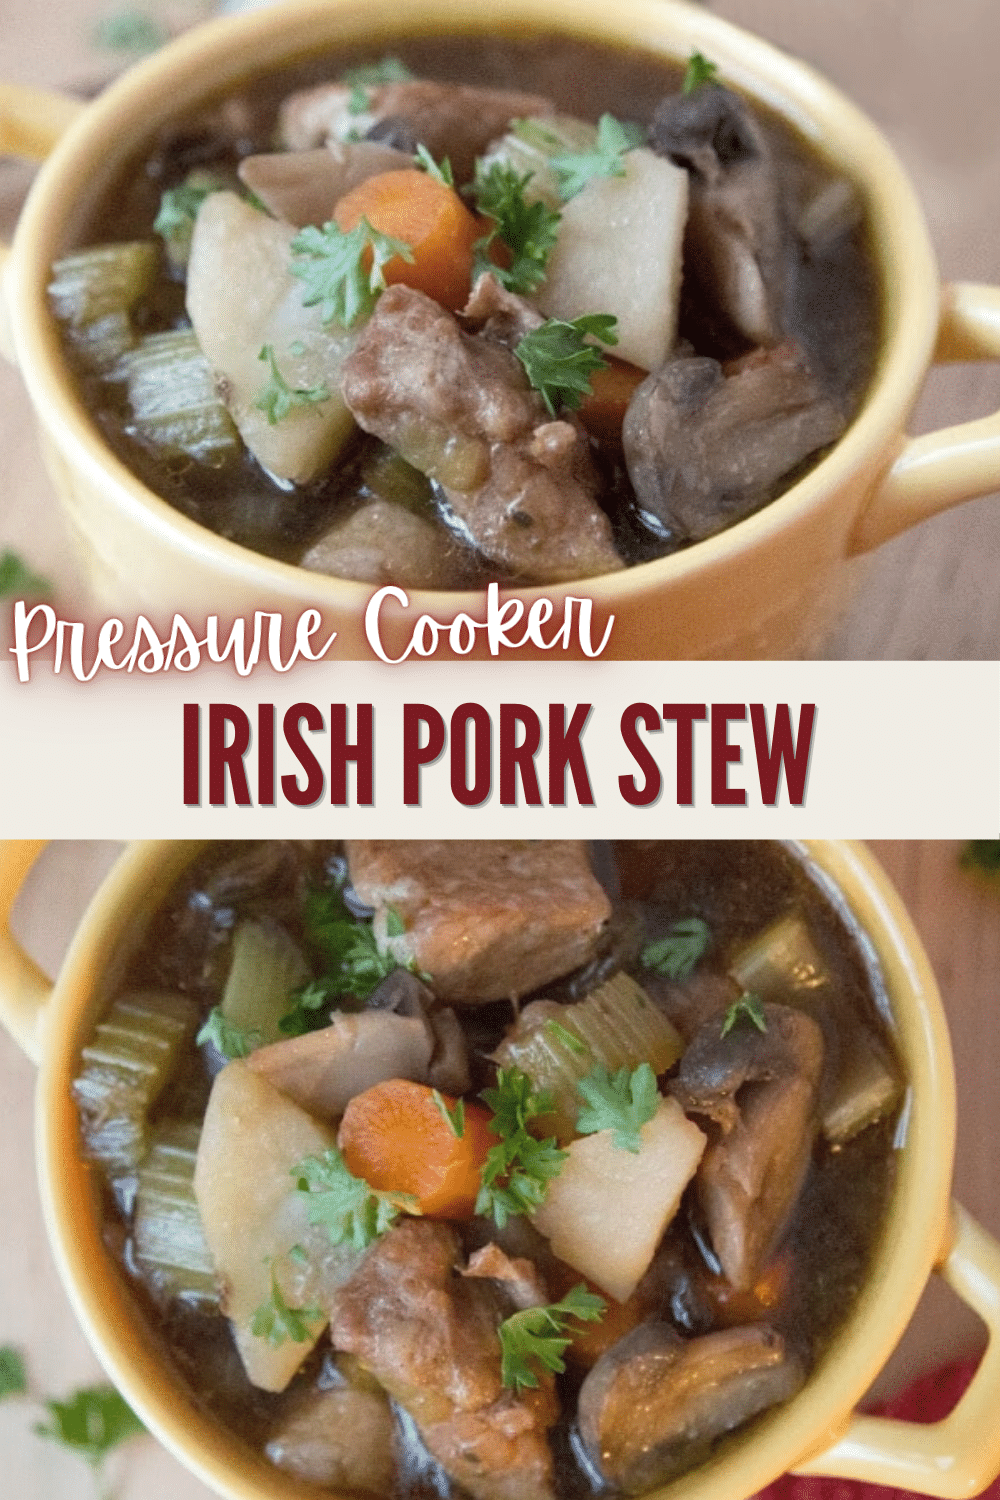 Pressure cooker Irish pork stew is a delightful dish made using a pressure cooker to achieve tender and flavorful pork. This traditional Irish recipe is perfect for those seeking a comforting and hearty meal.